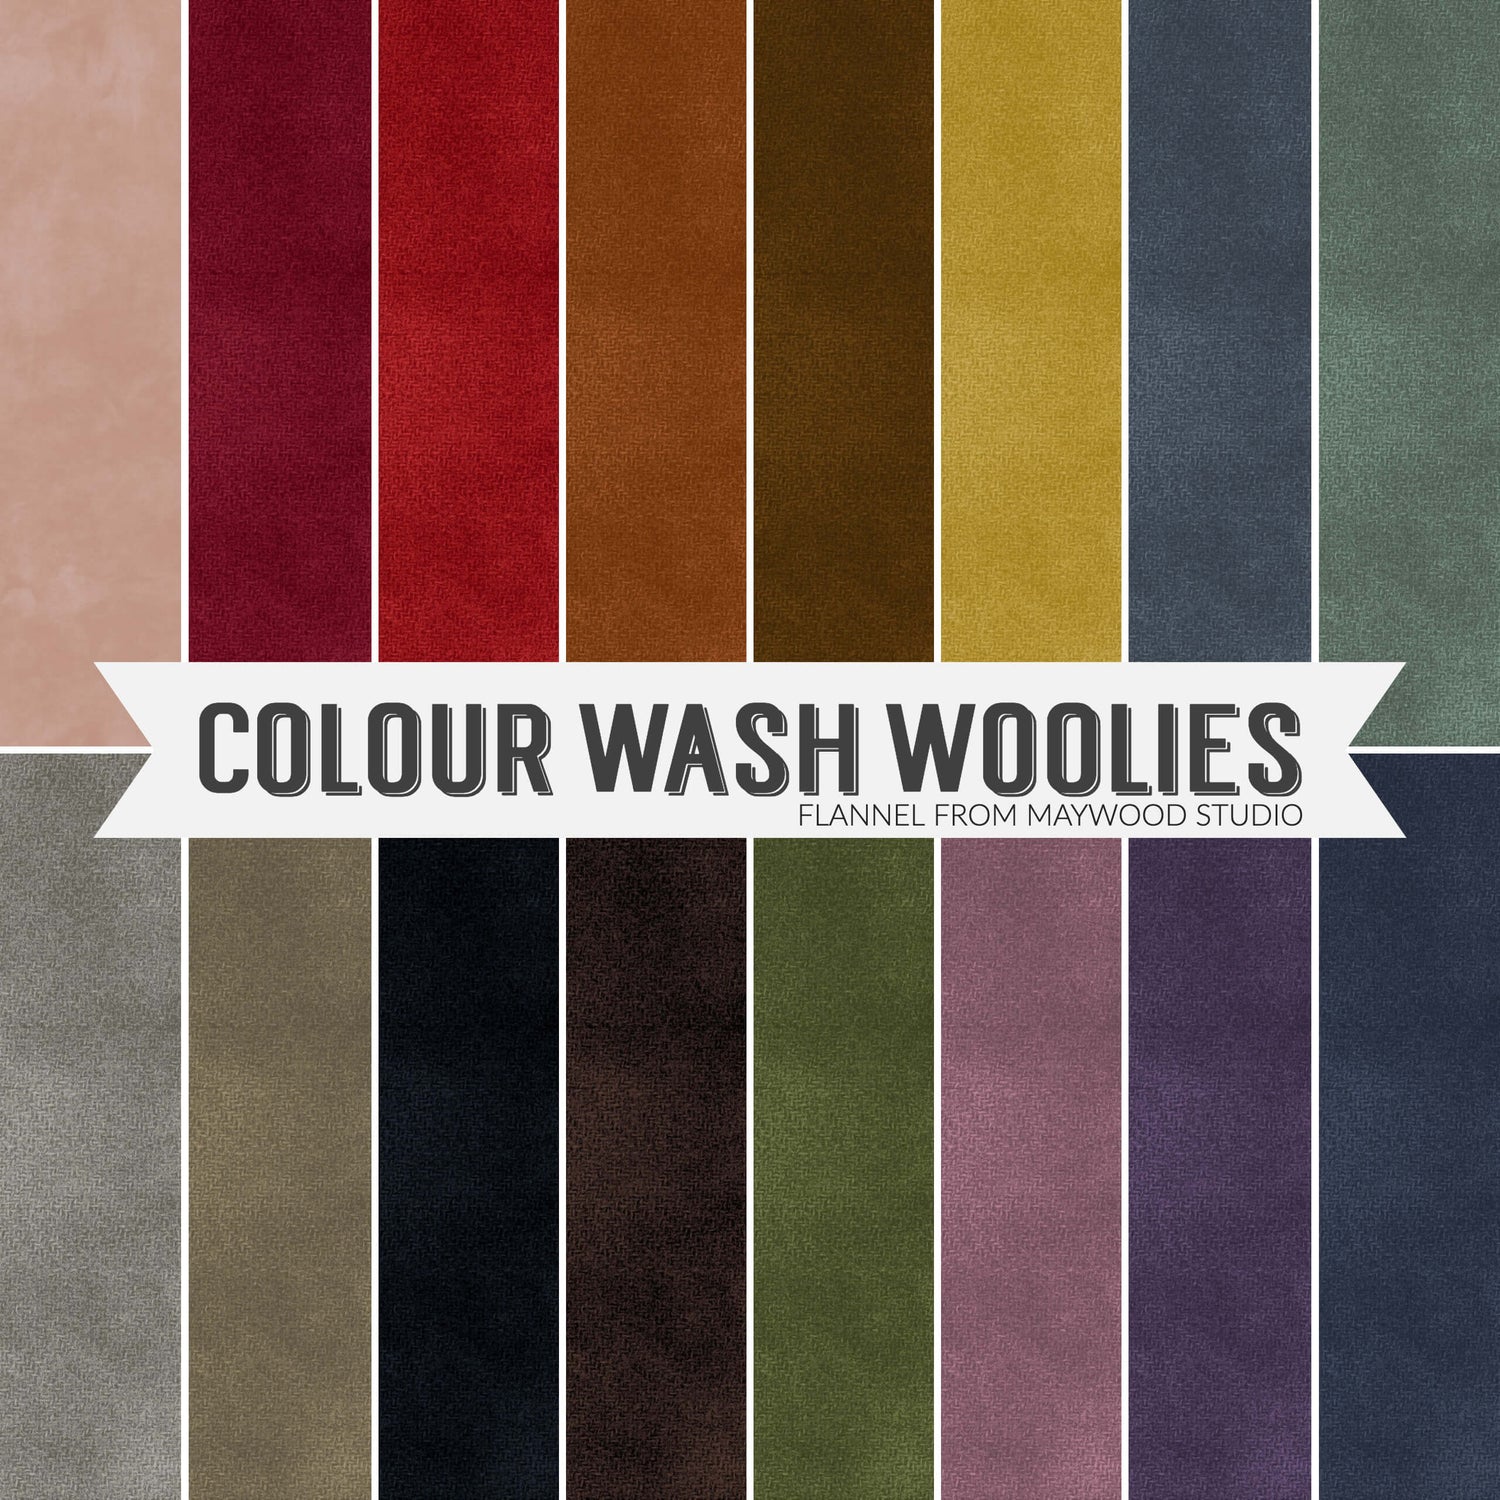 Colour Wash Woolies Flannel